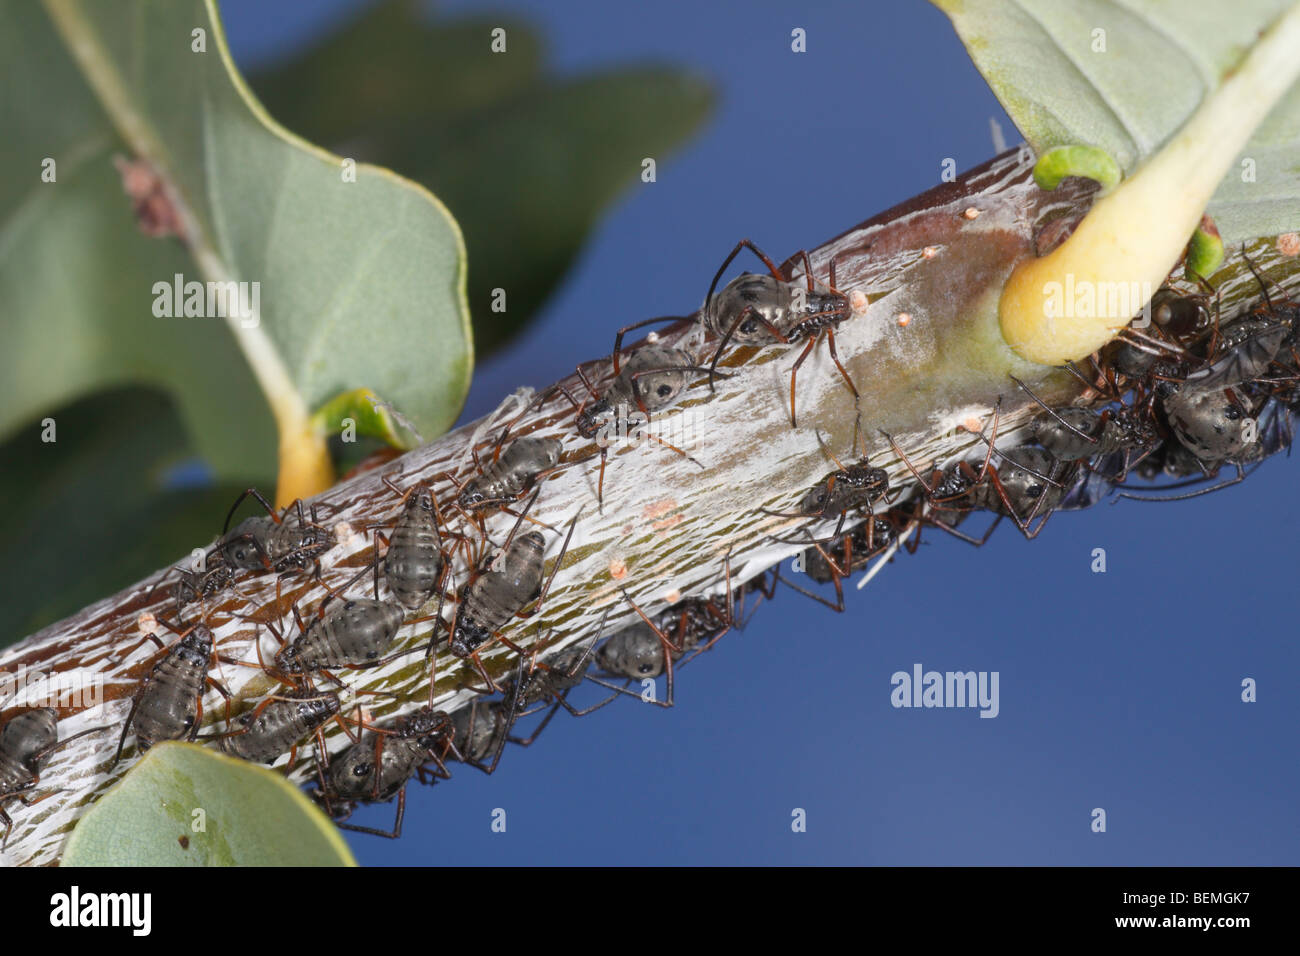 Lachnus roboris, an aphid that feeds on oak. This is a whole colony, shot against the blue sky. Stock Photo